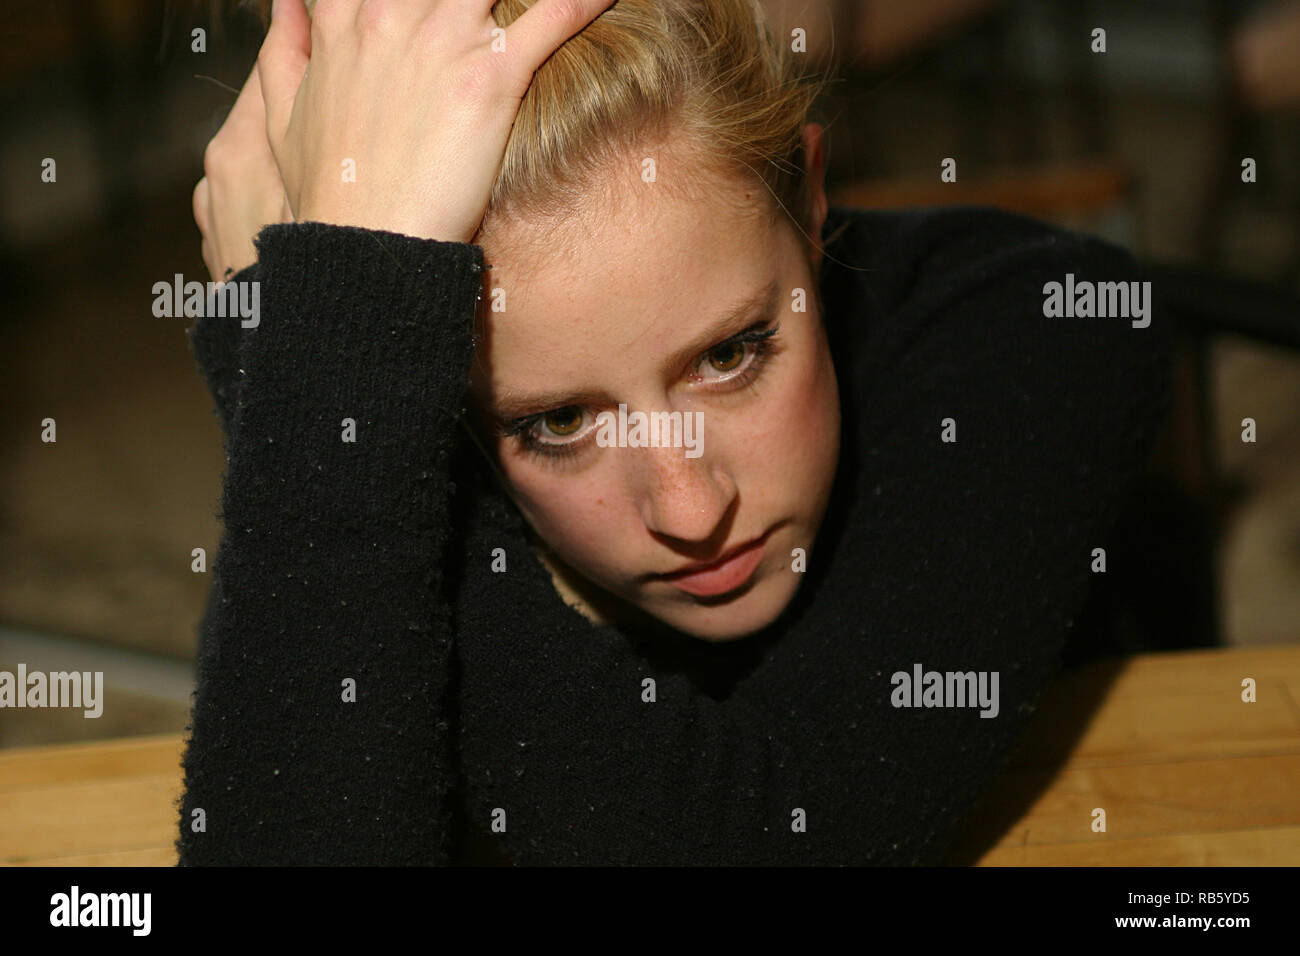 Really stressed out blonde girl having a bad day Stock Photo